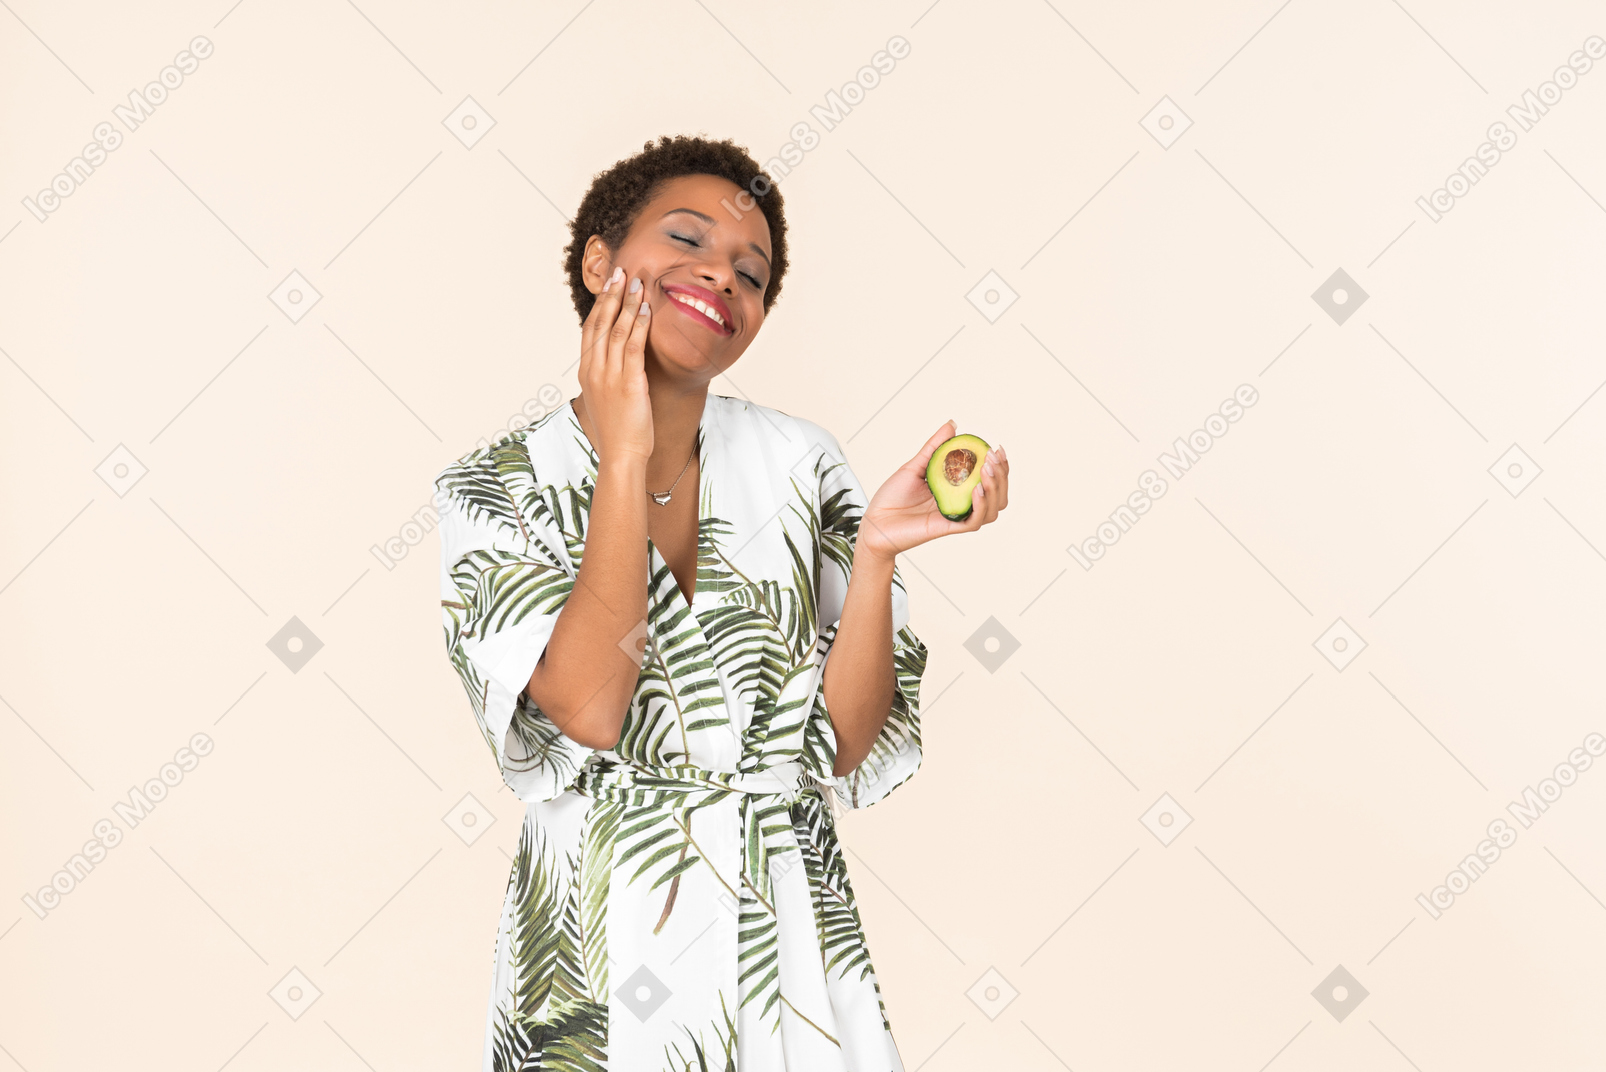 Young black short haired woman in a dressing gown, holding half of an avocado